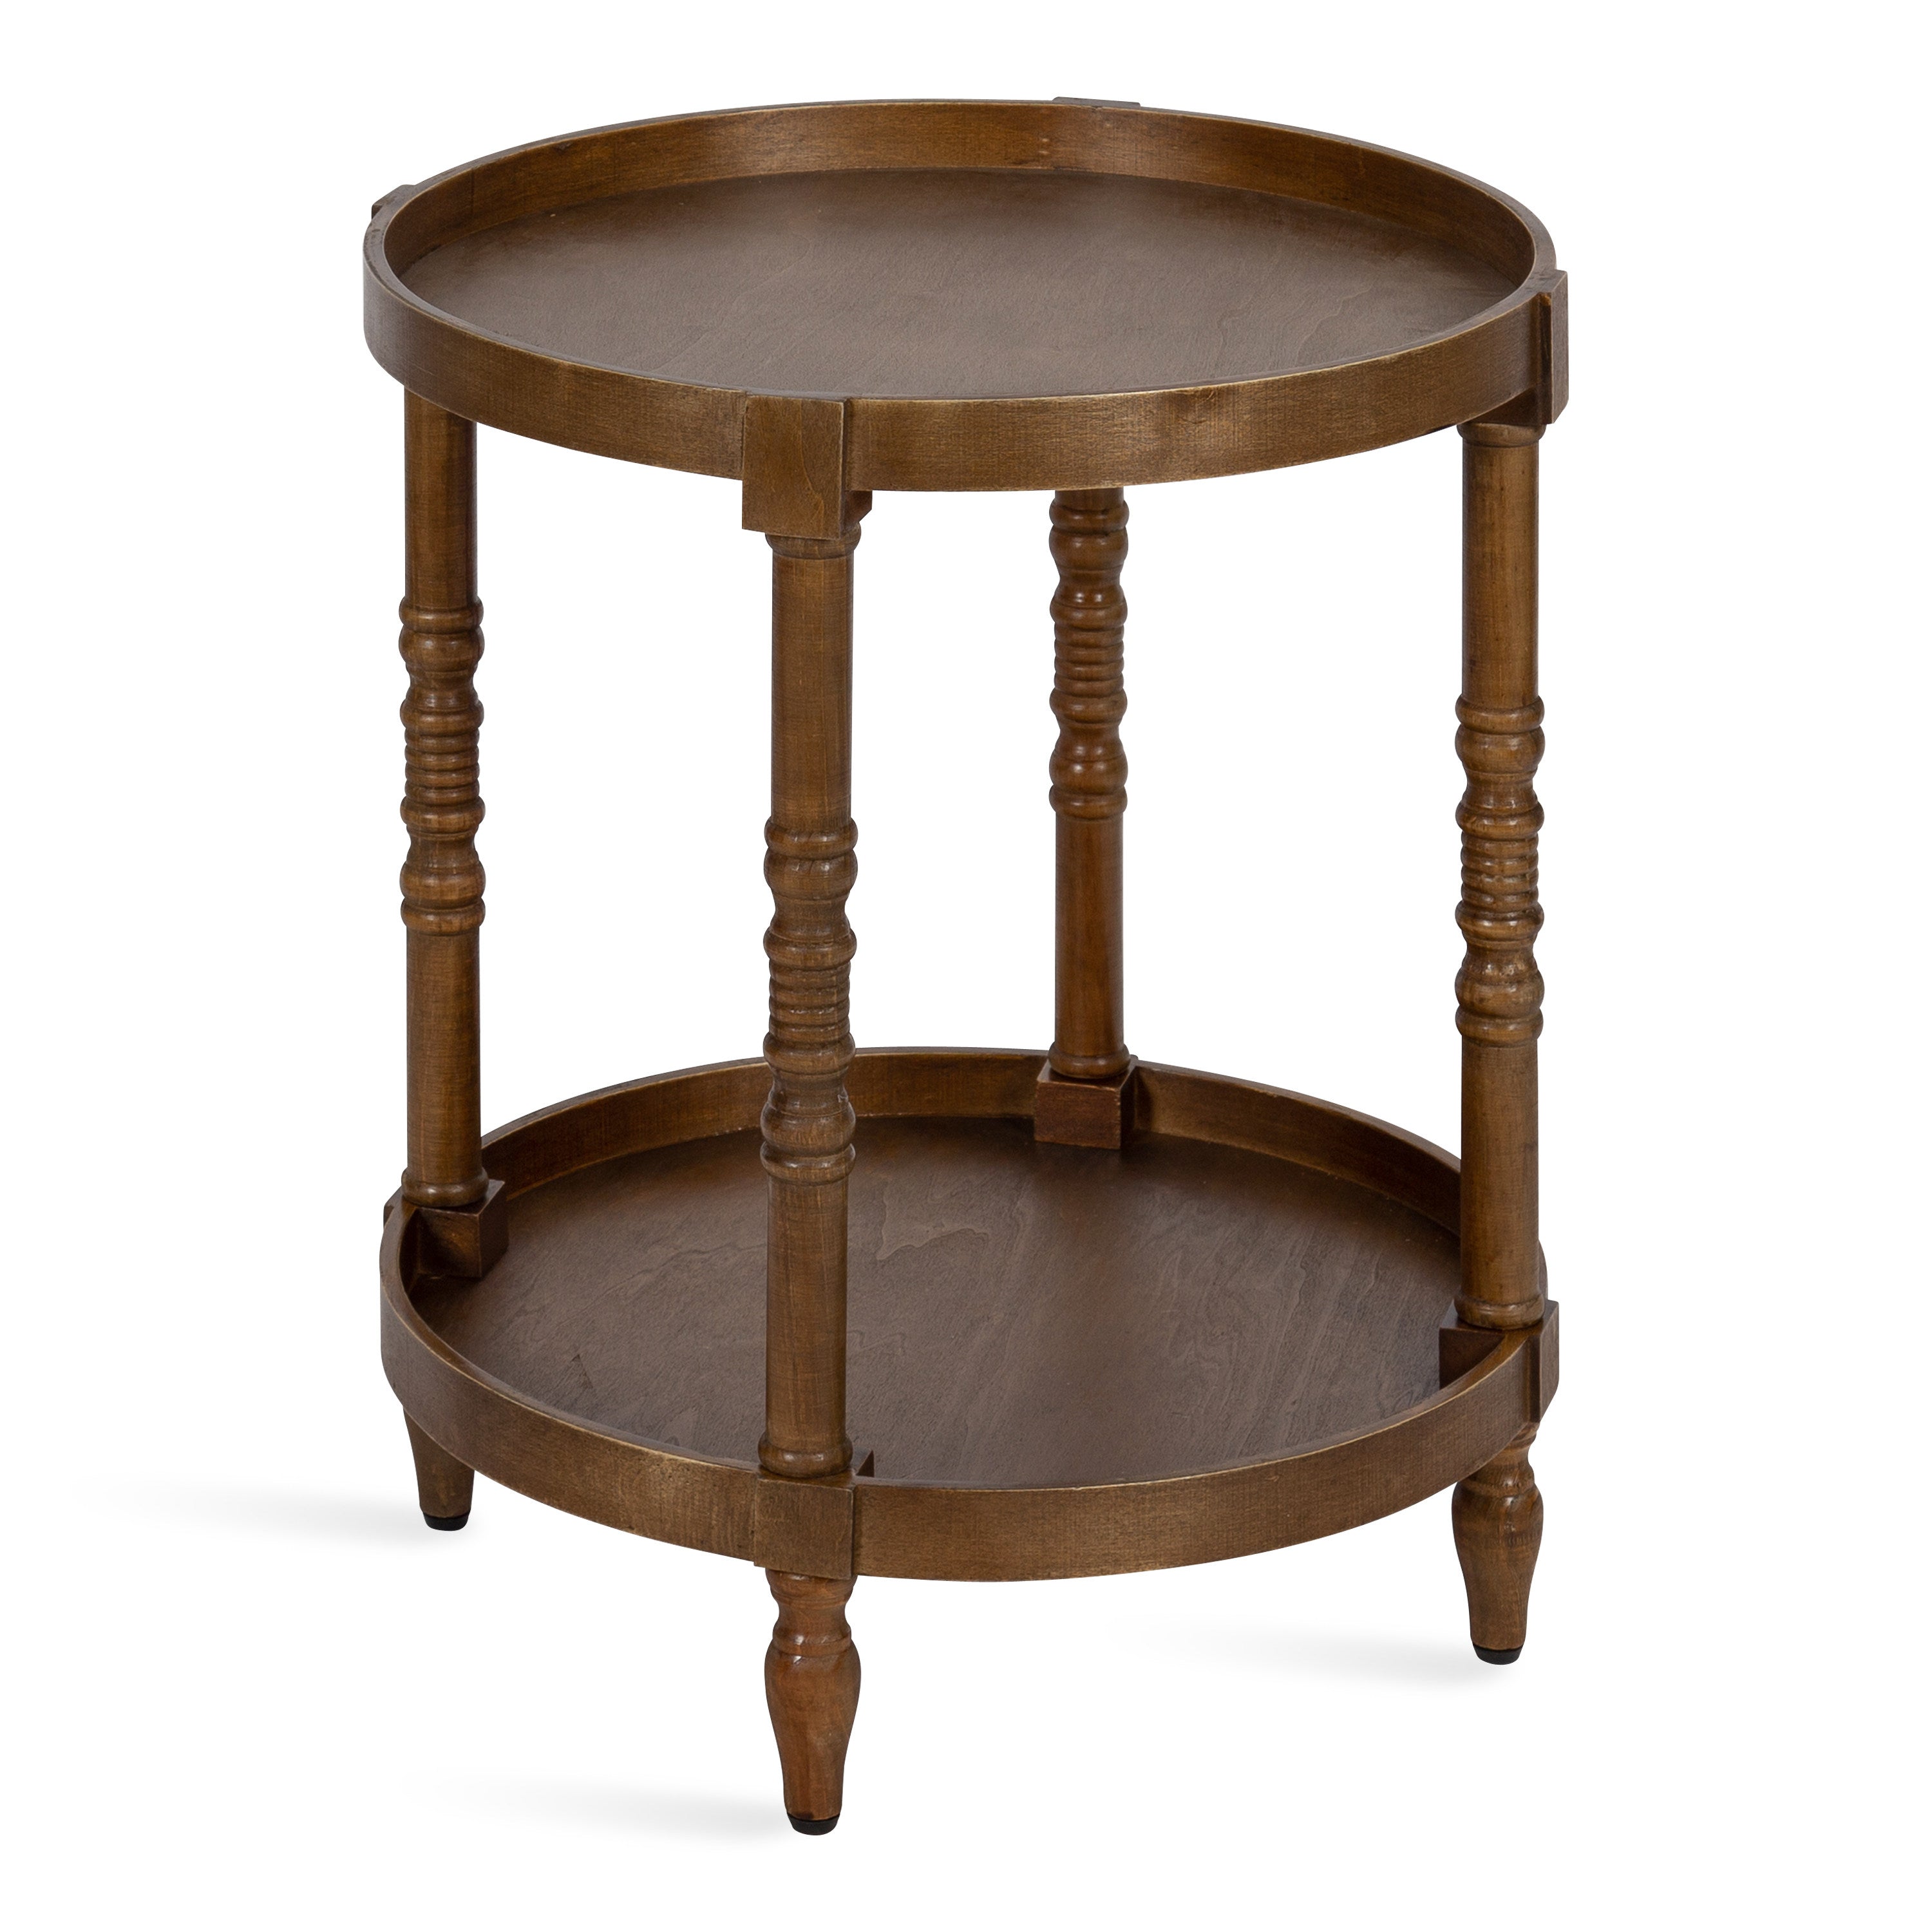 Bellport Round Wood Side Table with Shelf